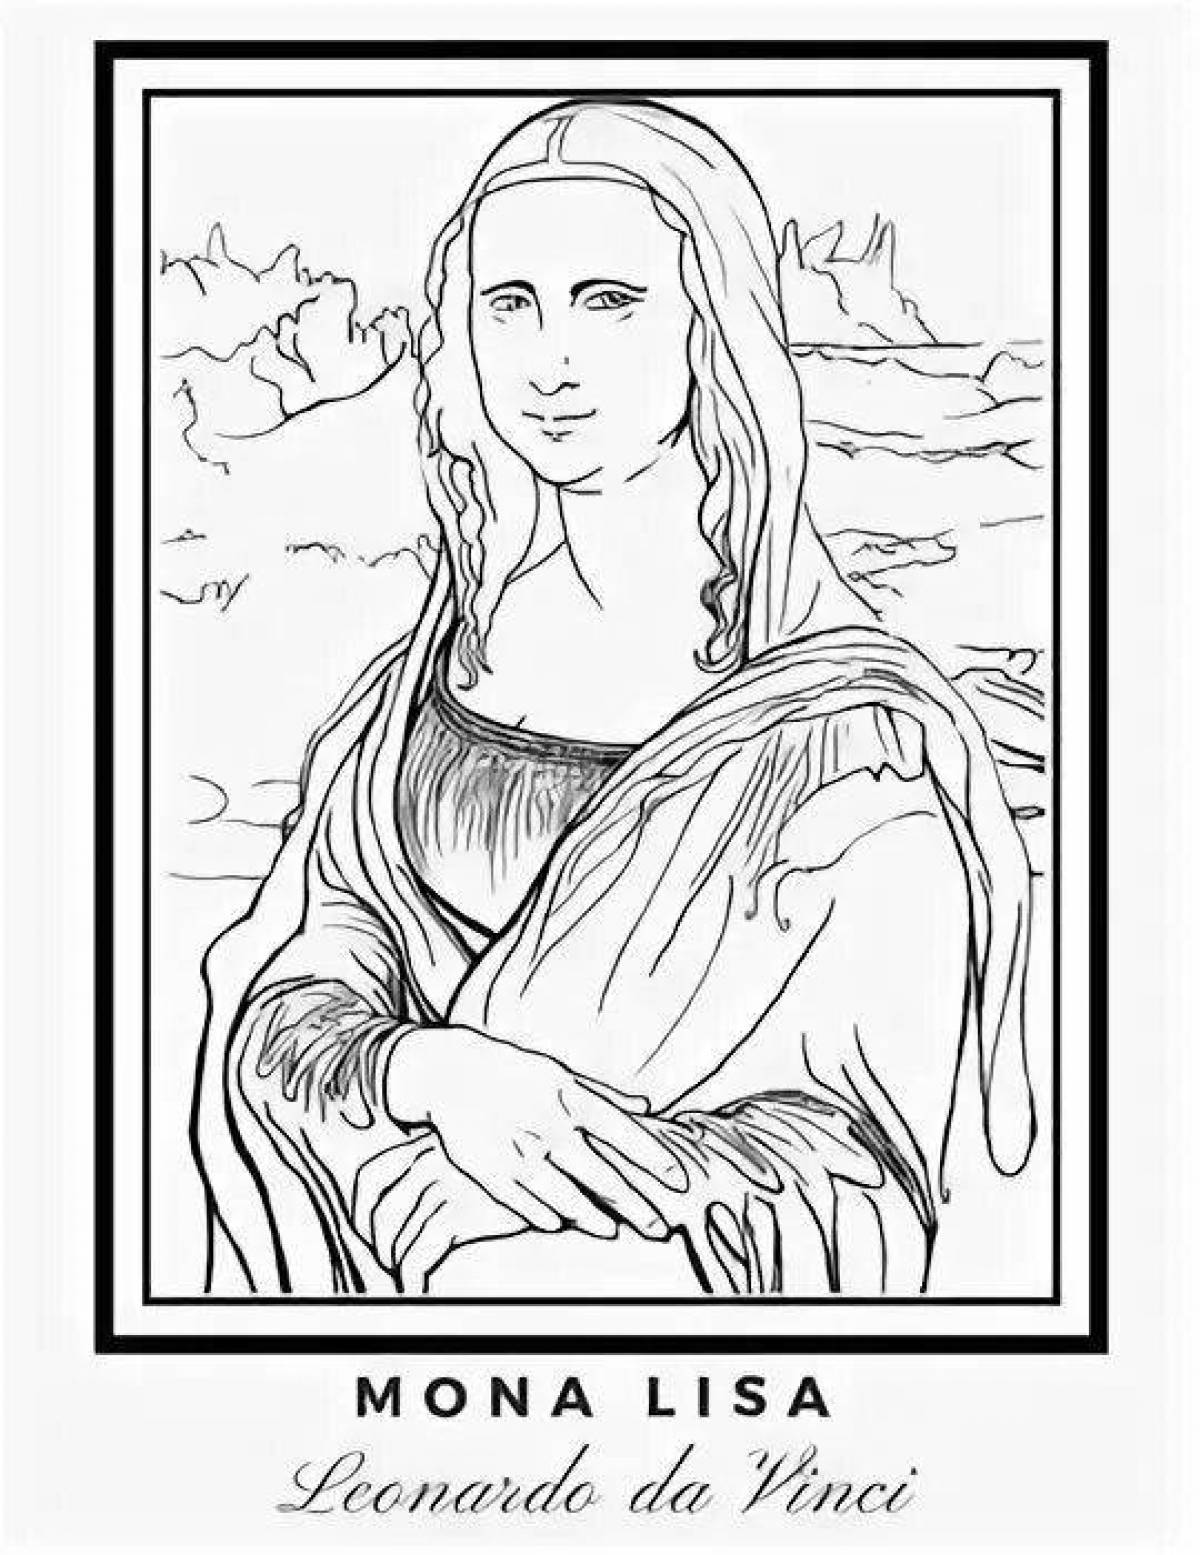 Mona Lisa's colorful coloring page